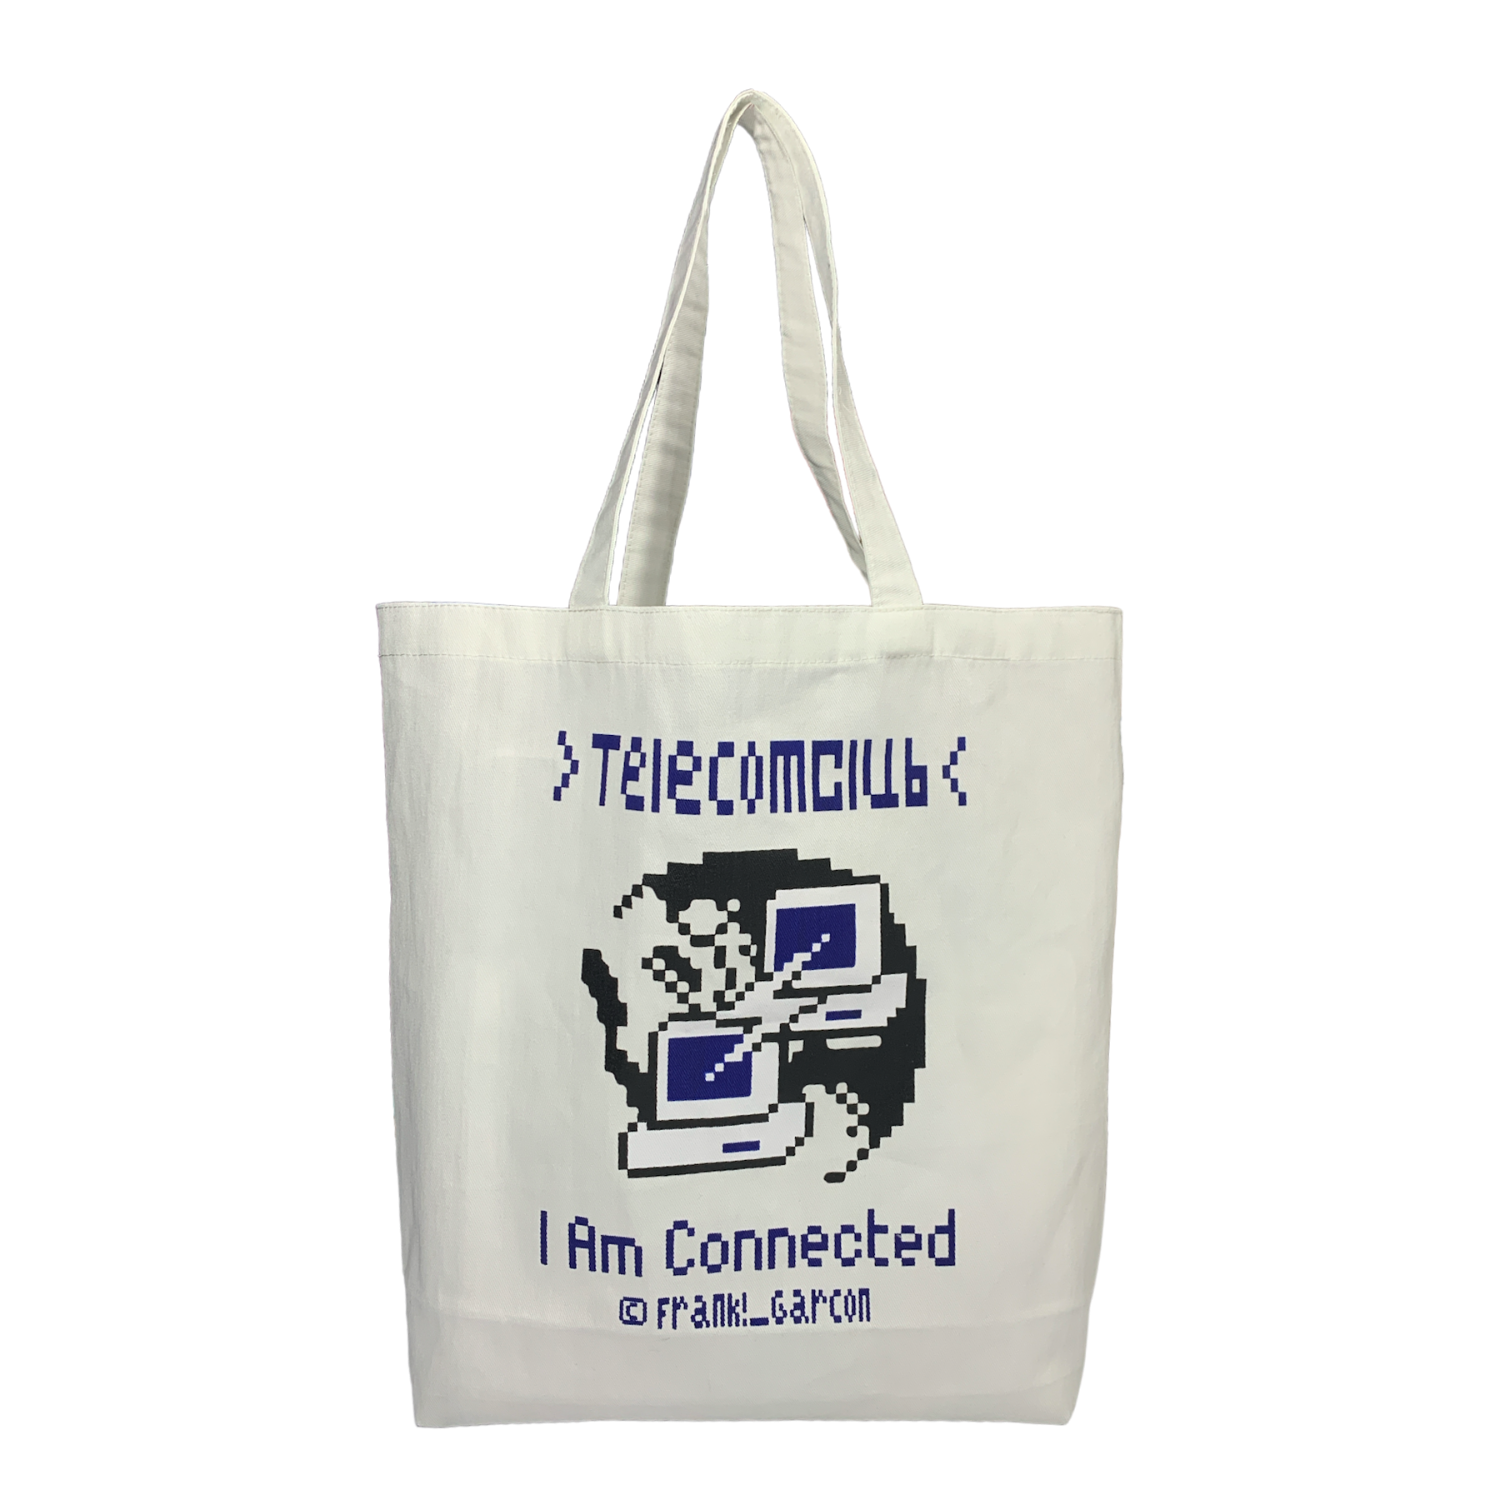 I AM CONNECTED TOTE BAG